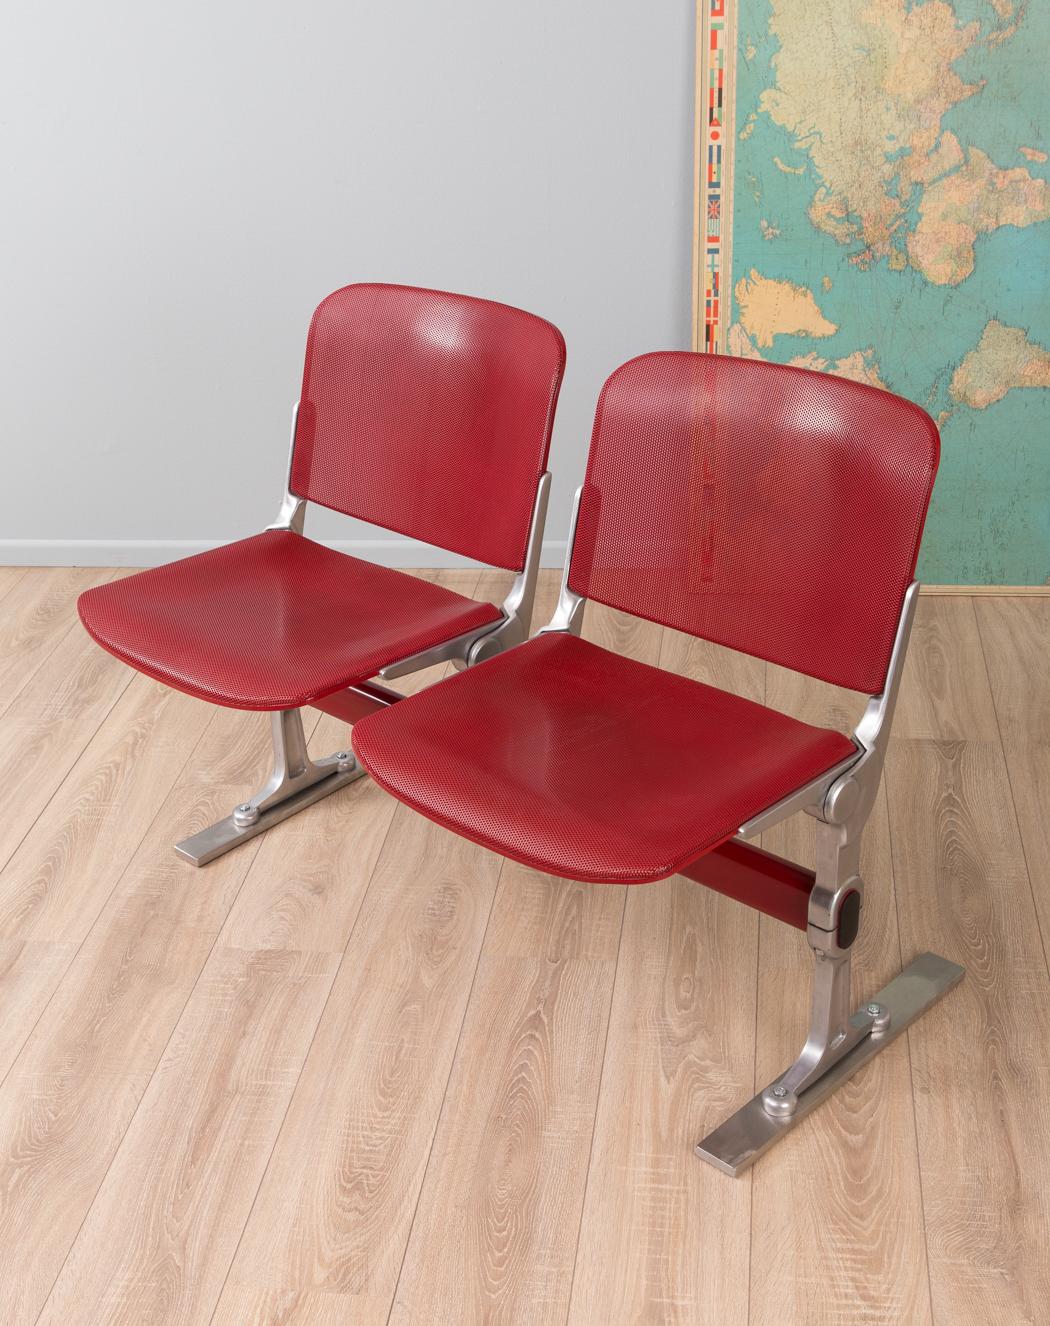 Unique waiting bench from the 1980s. High-quality aluminium frame with a seat and back made of wine-red metal. Heavy stainless steel blades ensure a stable stand. Practical seat for the entrance area. Made in Germany.